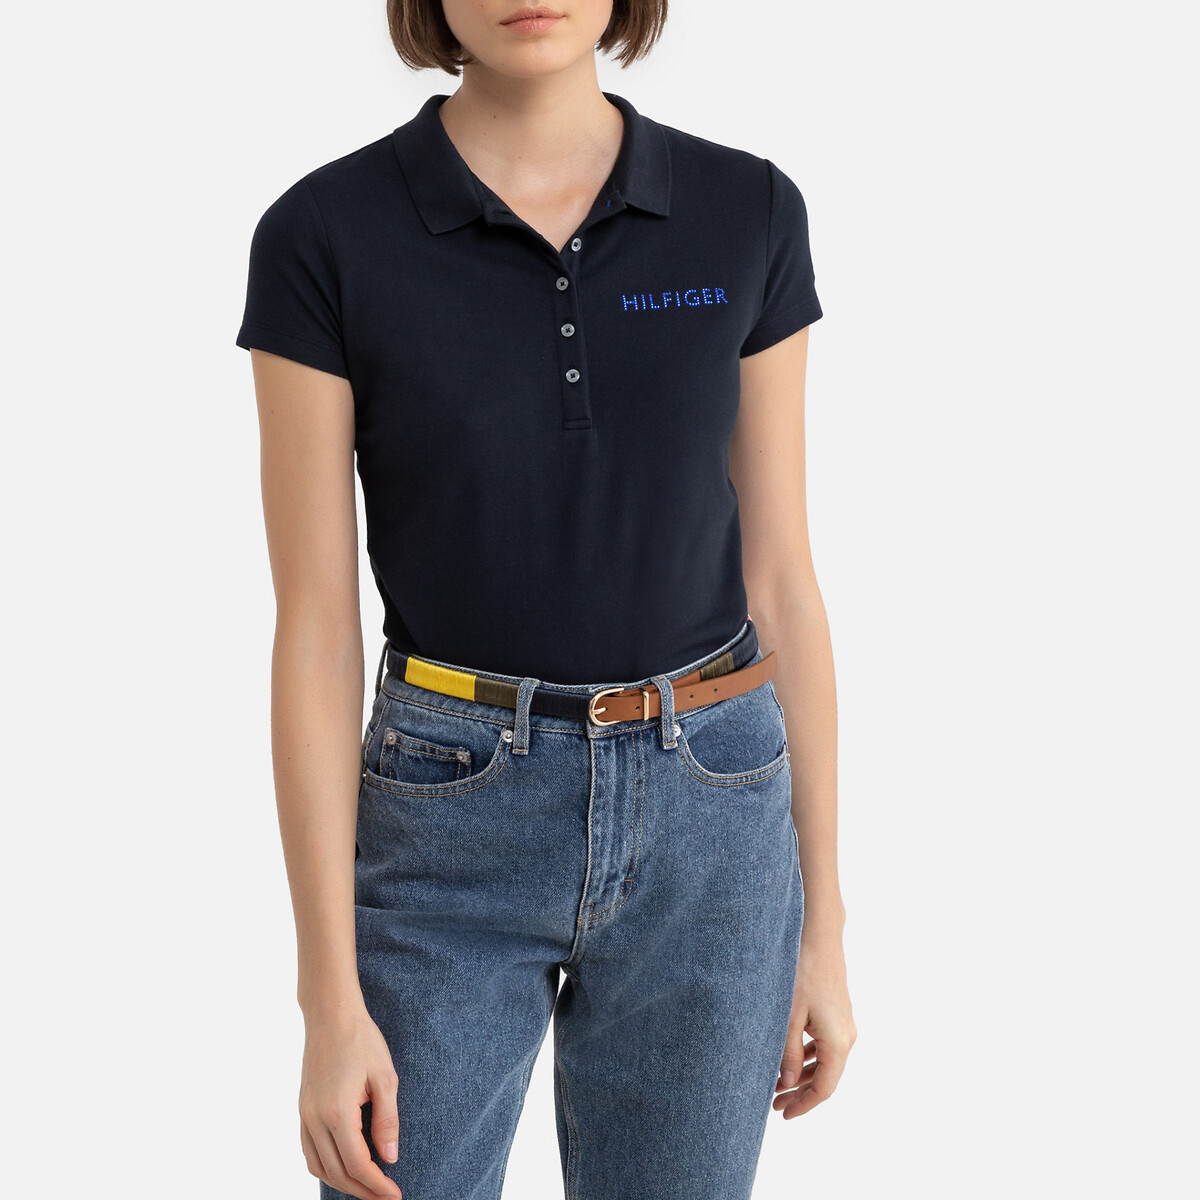 Cotton Polo Shirt with Short Sleeves